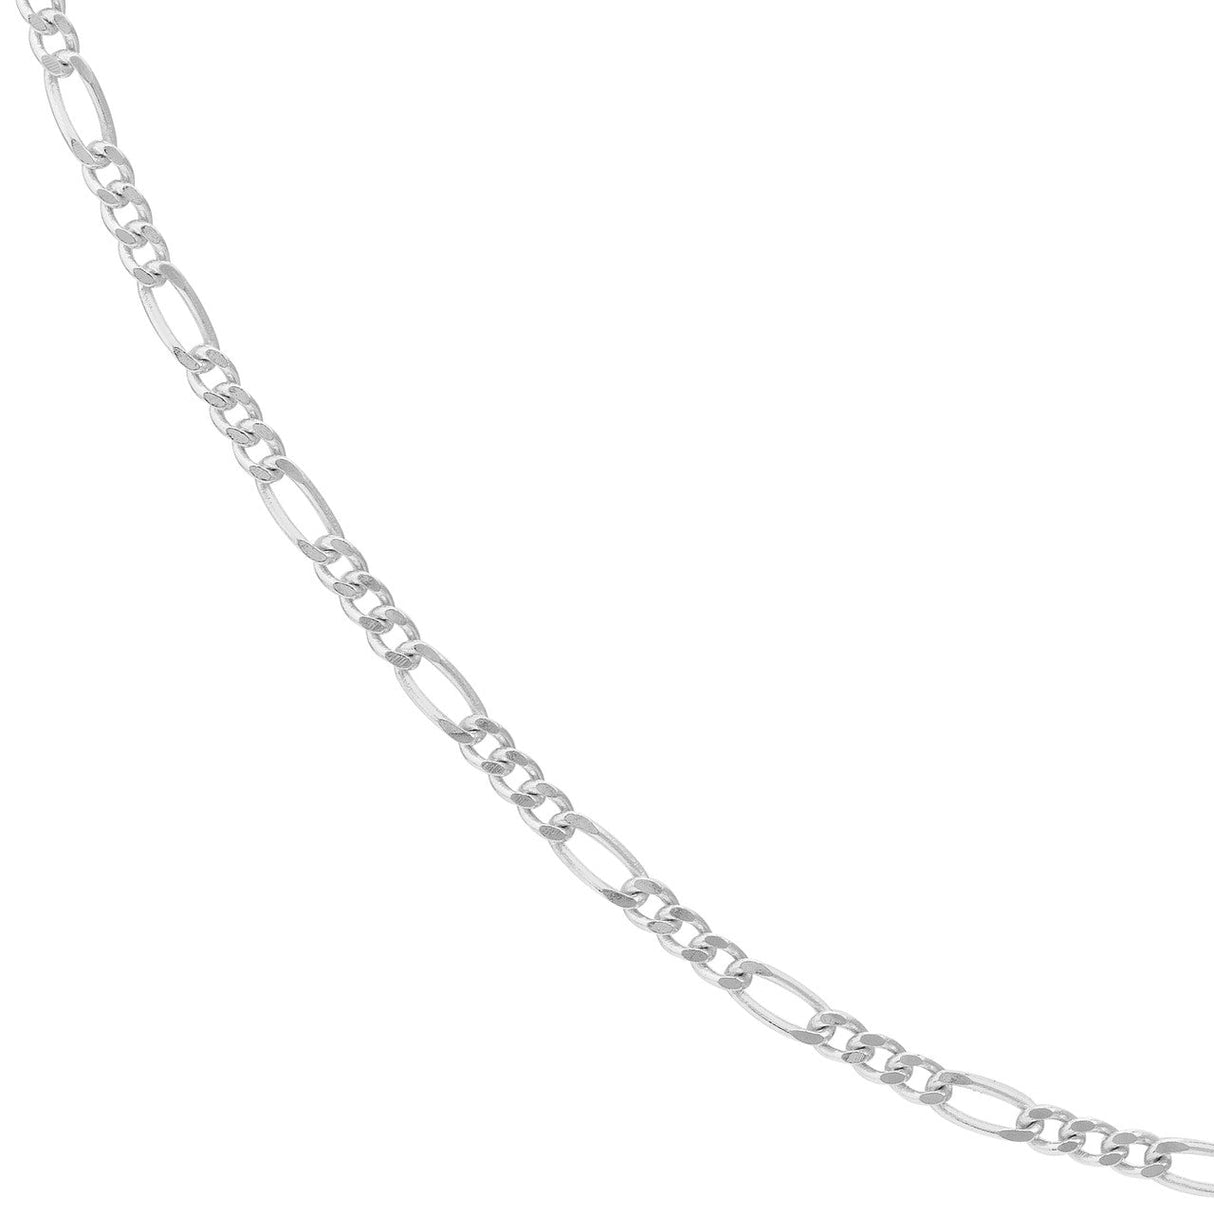 10K Gold Chain, 18", 1.30mm Figaro Chain with Spring Ring, Gold Layered Chain, Gold Necklaces, - Diamond Origin